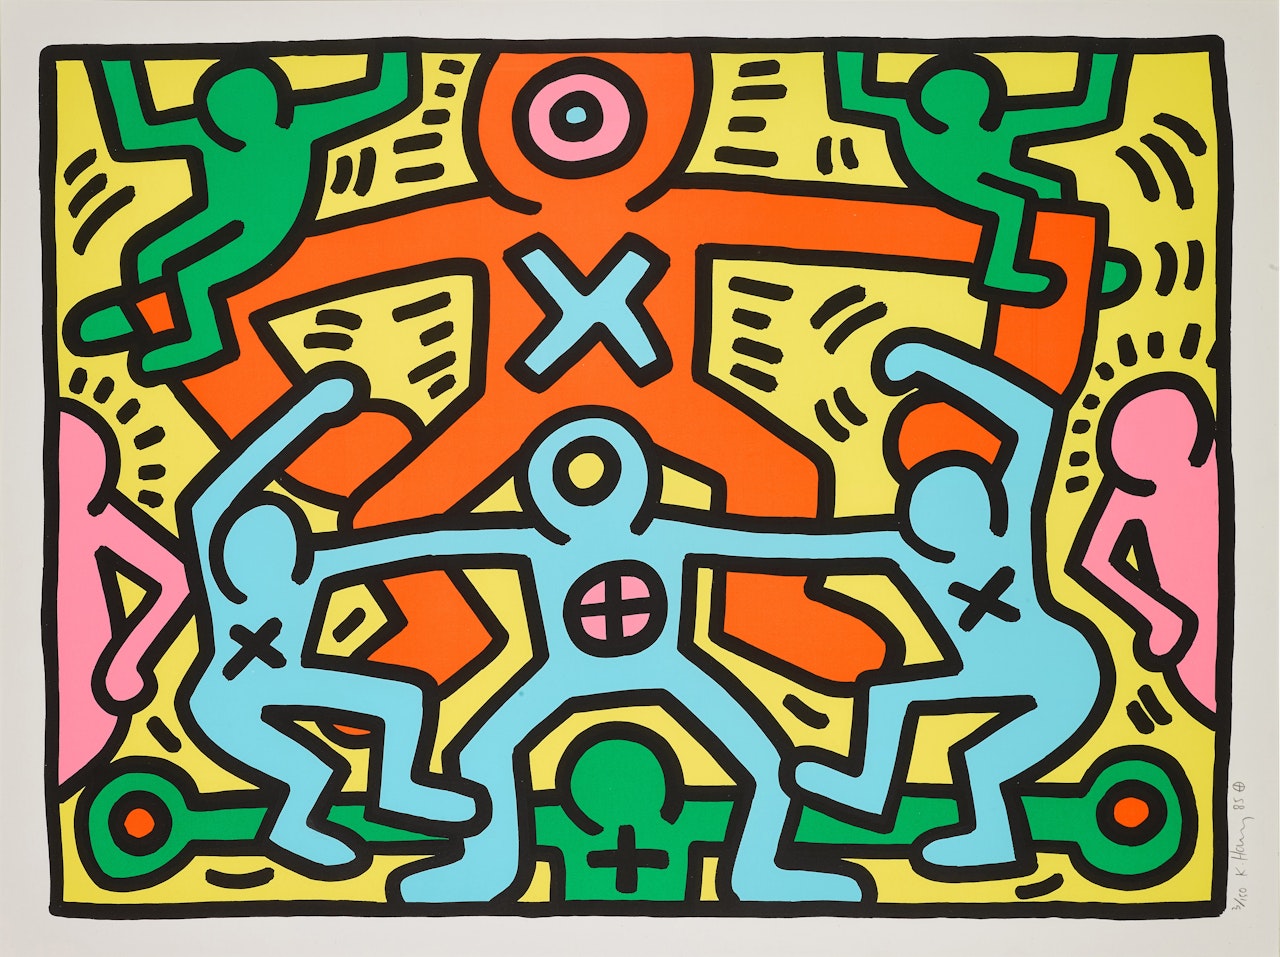 Untitled (Littmann p. 50) by Keith Haring